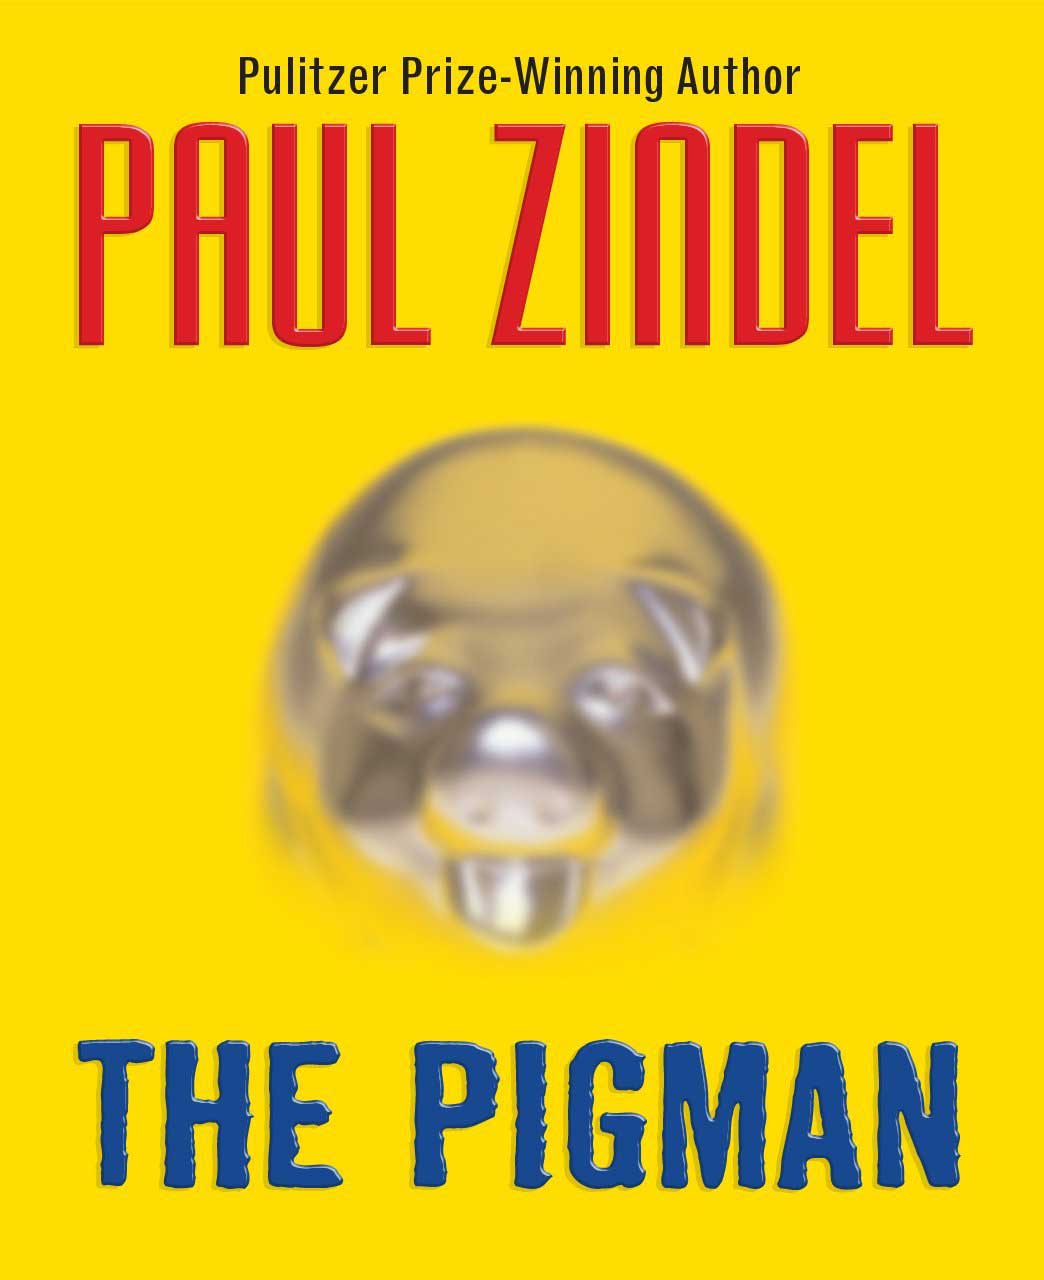 The Pigman, by Paul Zindel.
                              
                              
                              
                              John and Lorraine’s prank call unexpectedly leads to an enduring friendship with widower Angelo Pignati, whose care for the children transforms their lives.
                              
                              
                              
                              Buy now: The Pigman